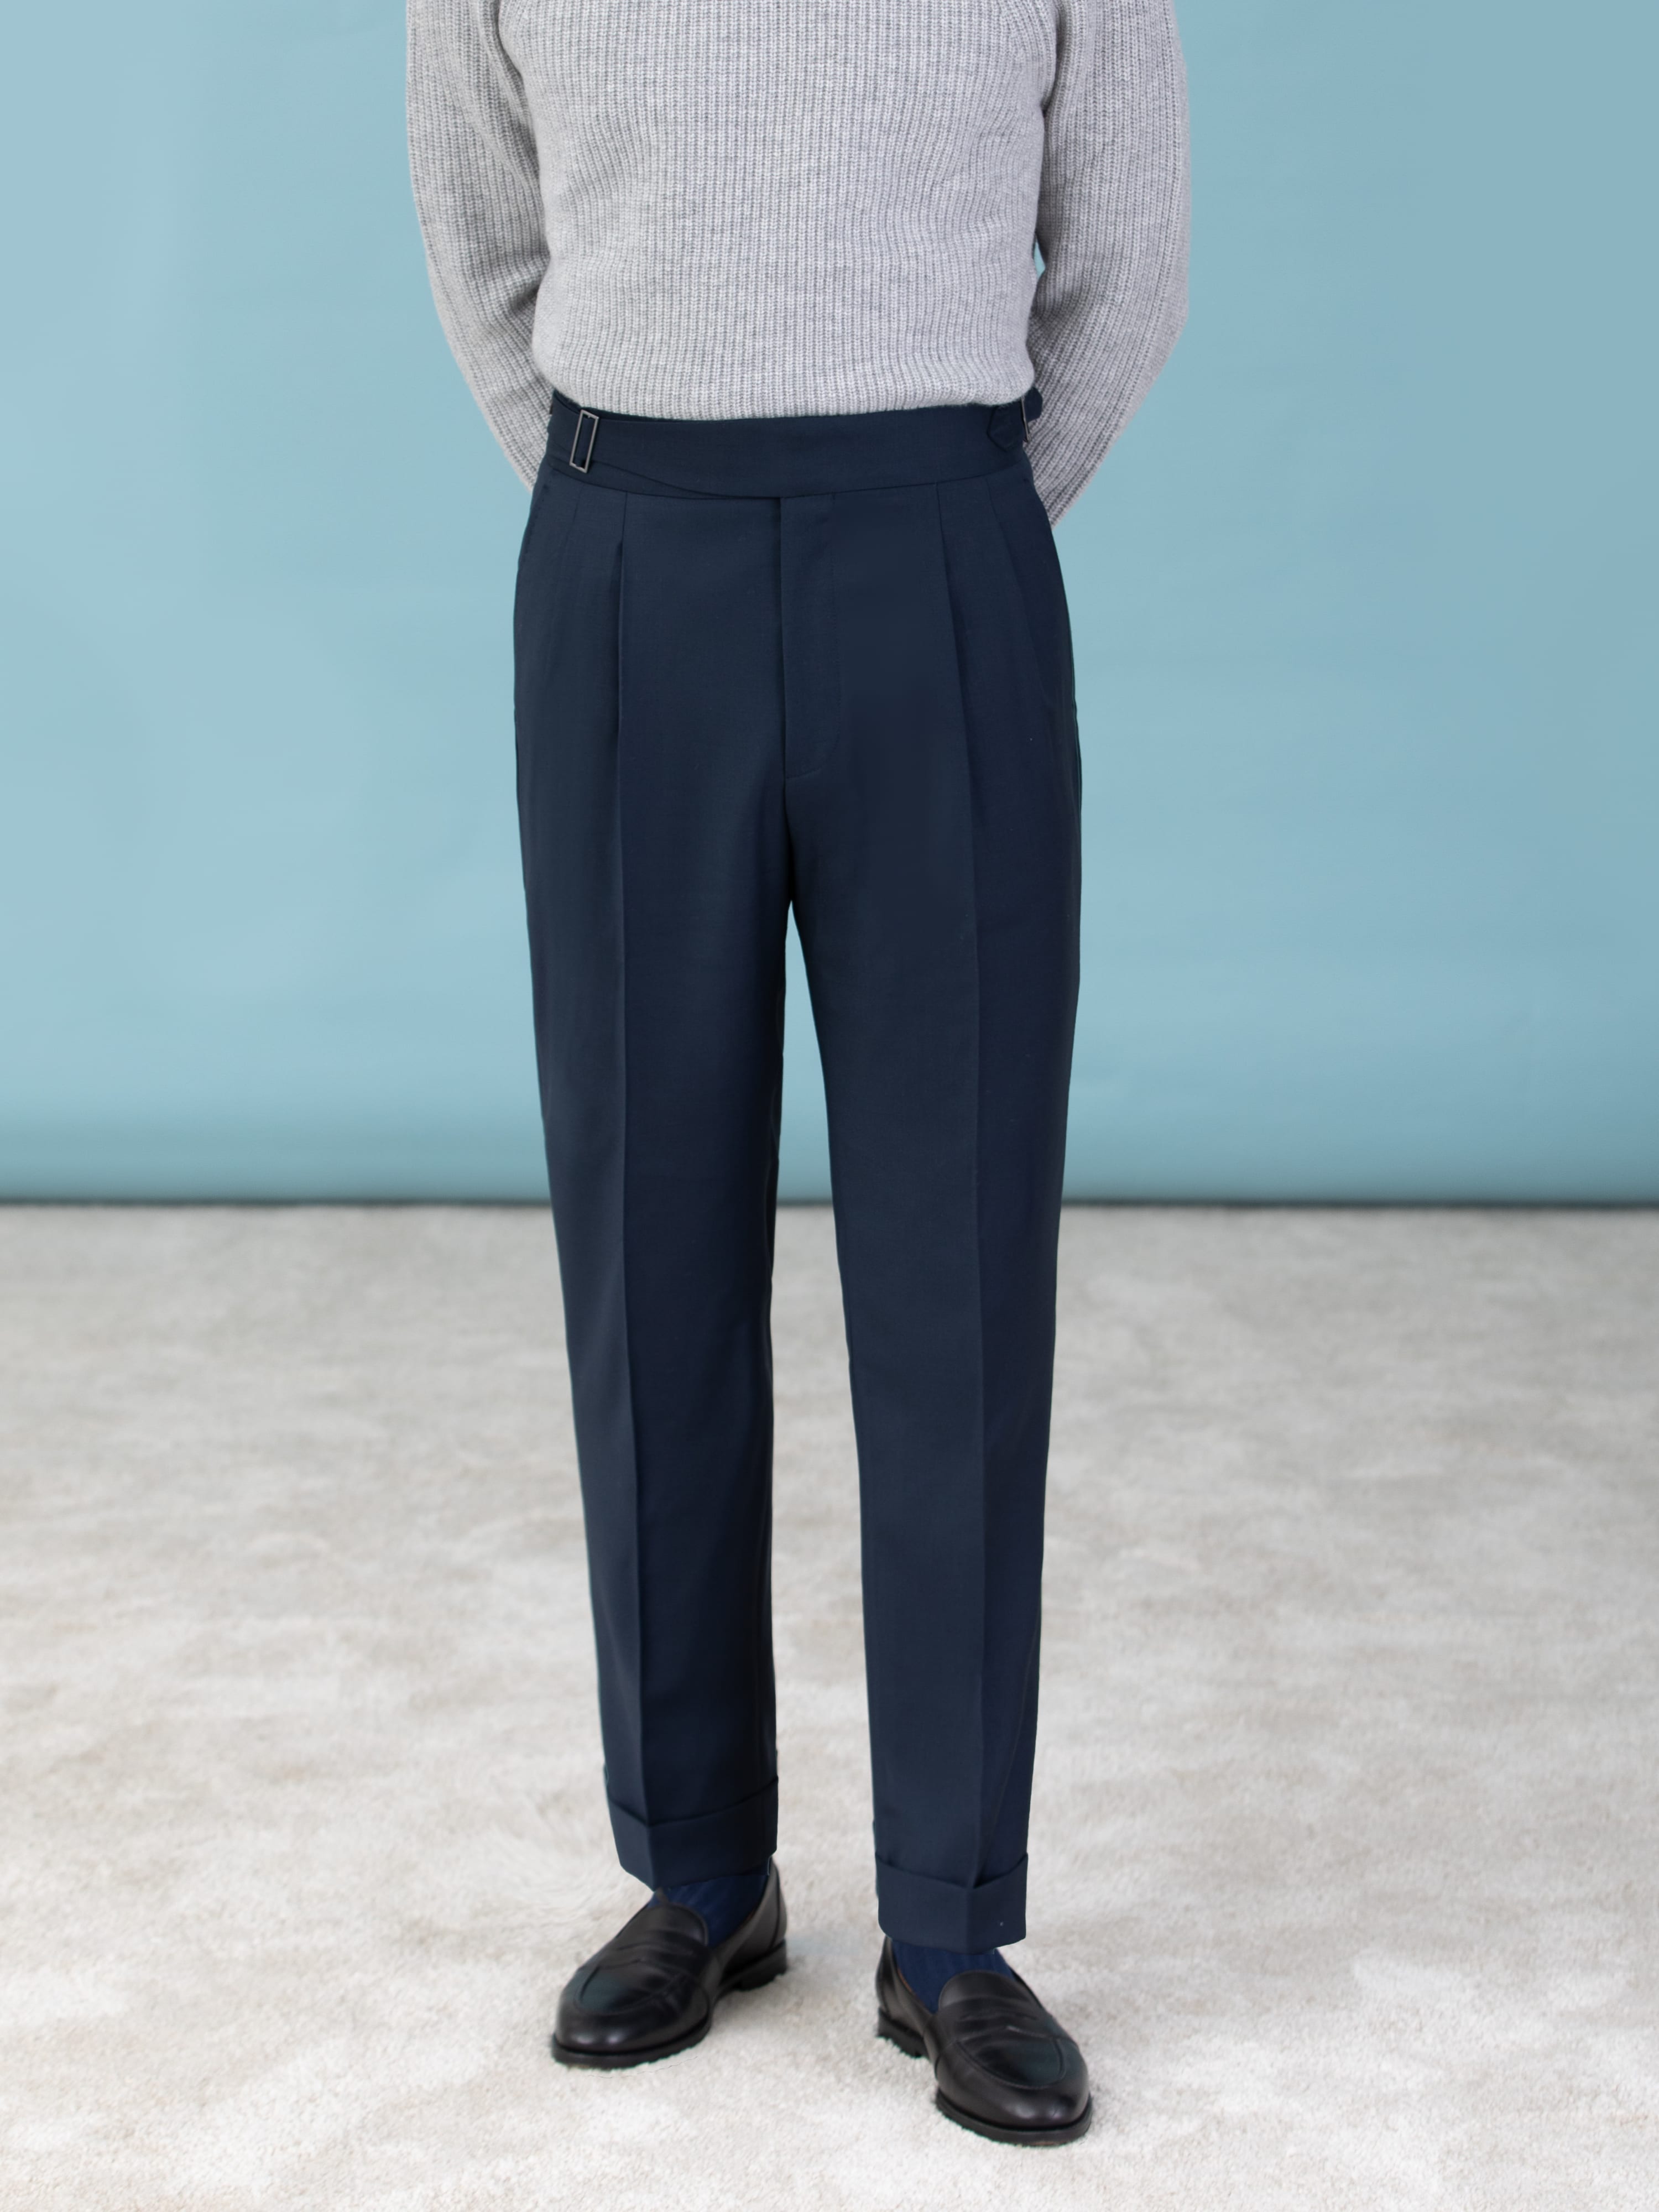 Alexander McQueen Tailored Straight-Leg Suit Trousers in Navy - Kate  Middleton Pants - Kate's Closet